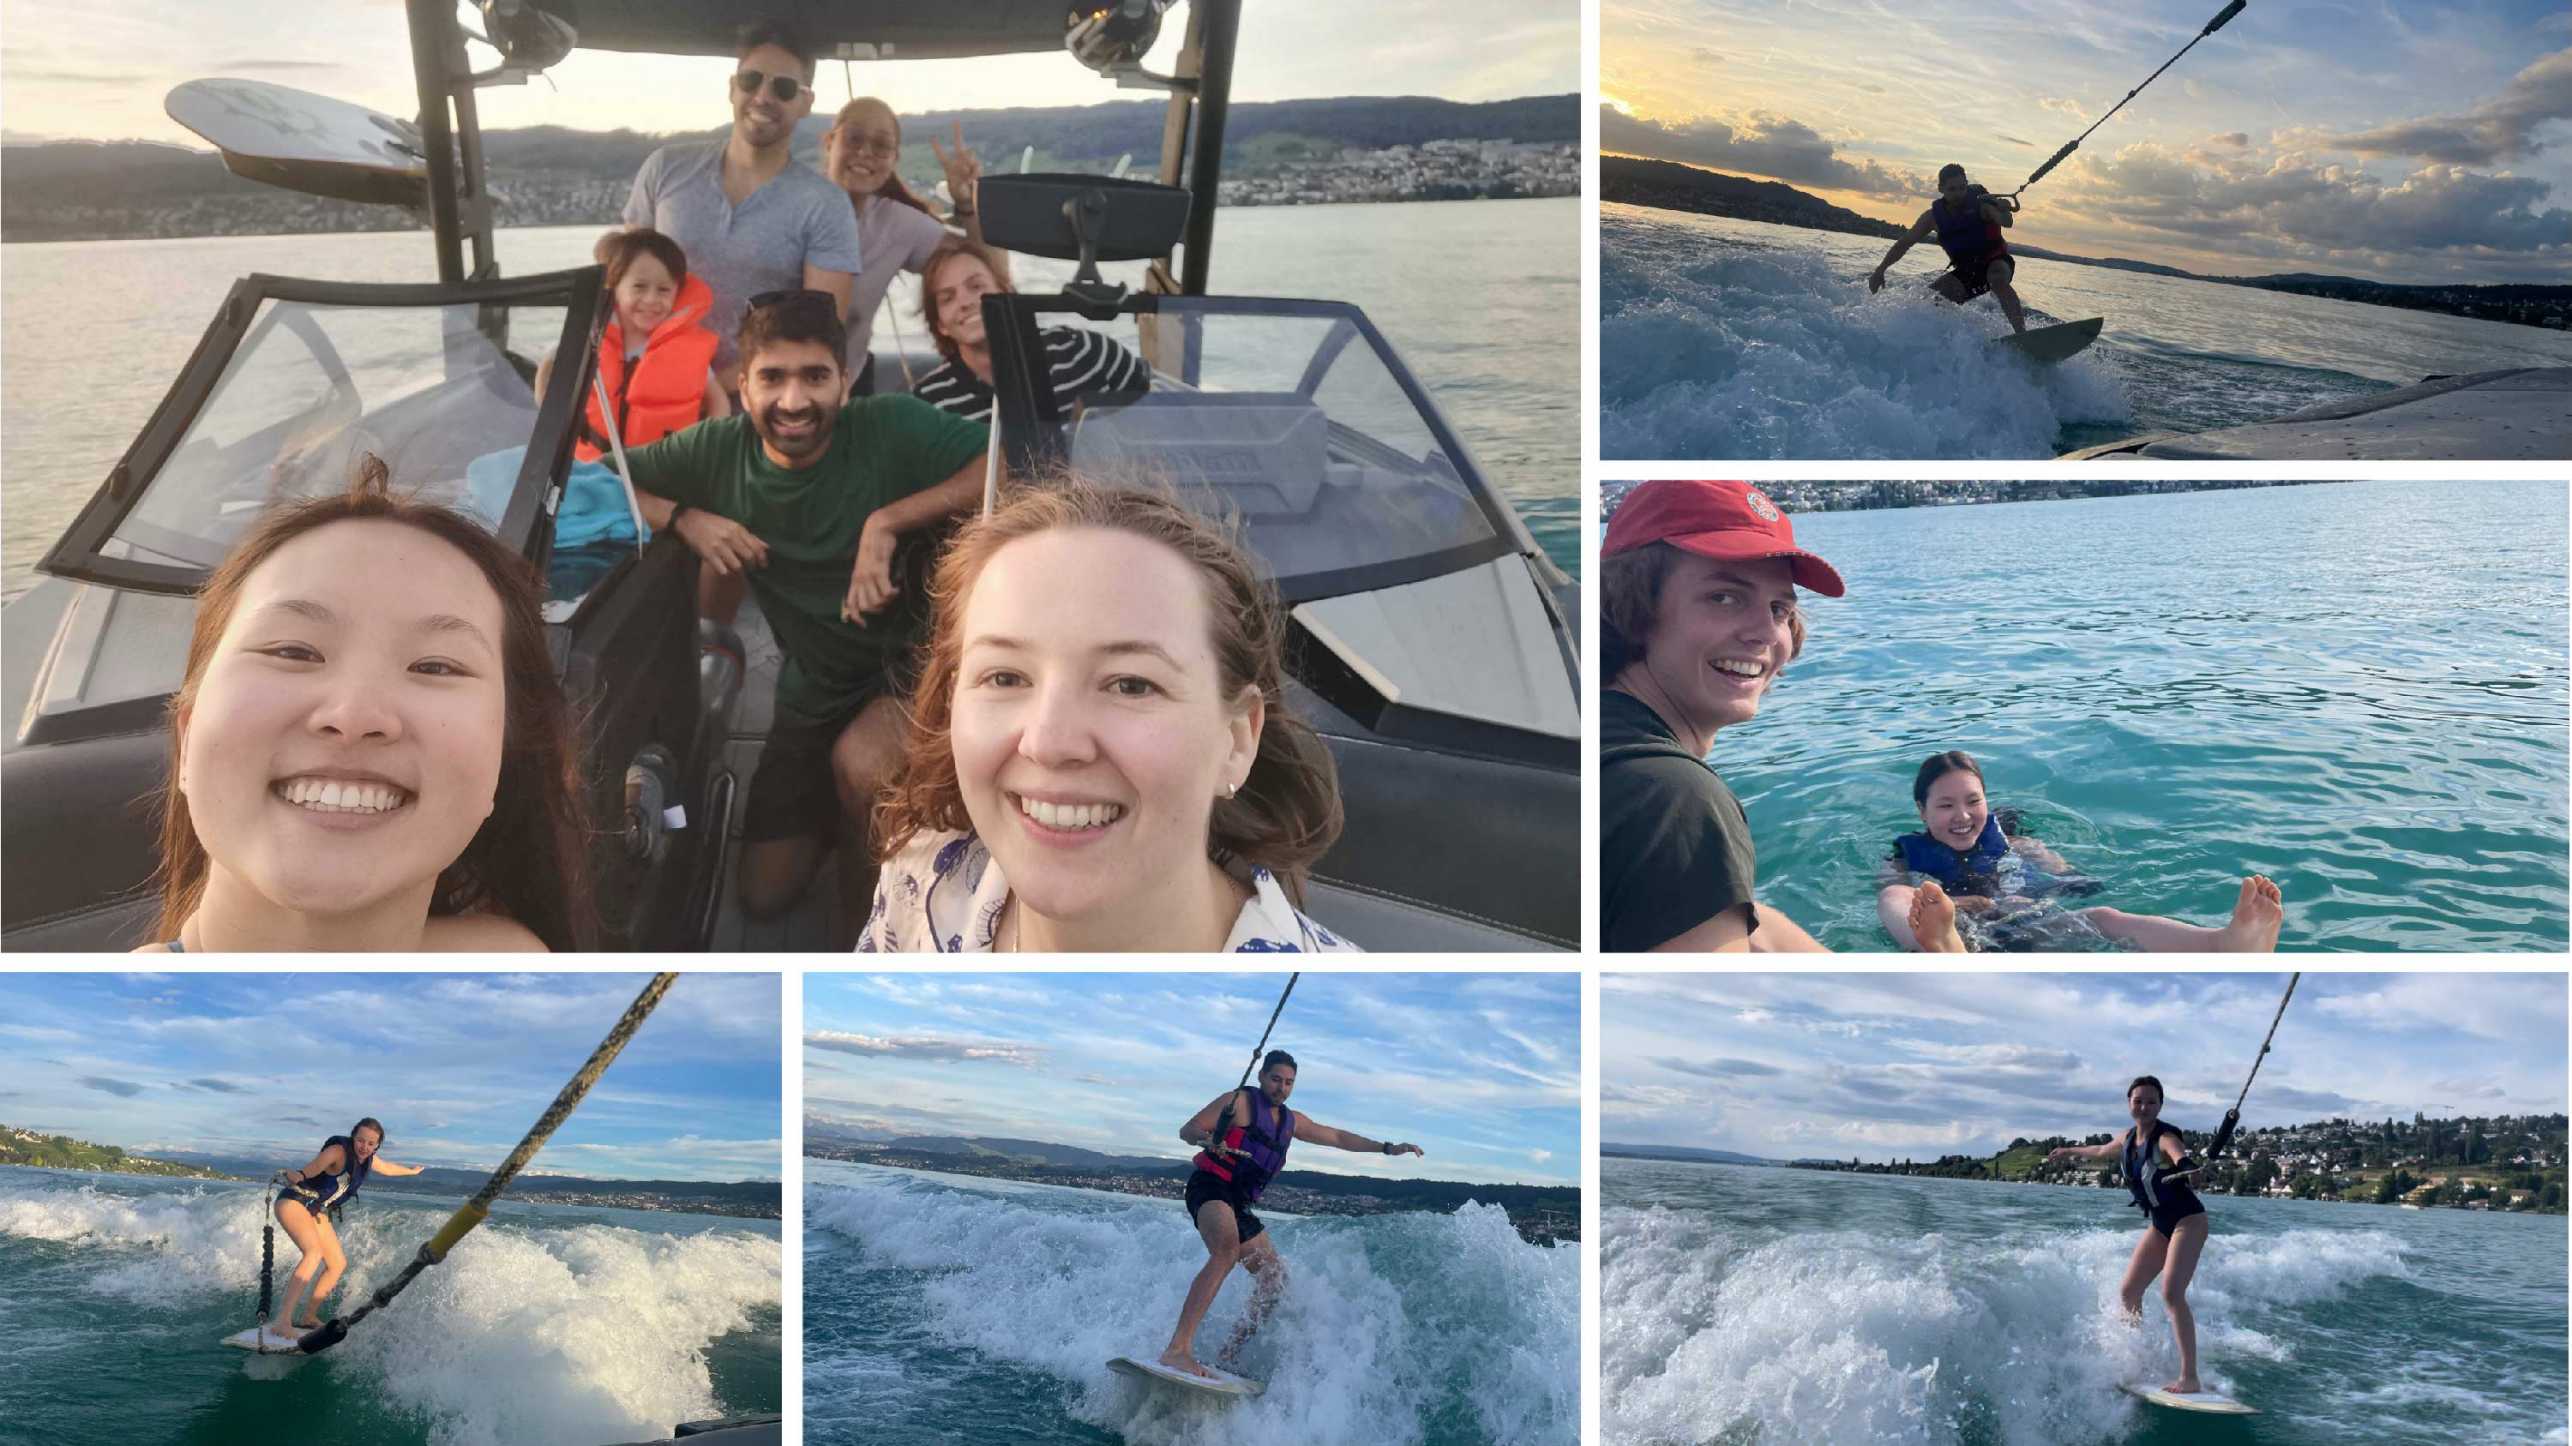 Enlarged view: Collage of pictures taken during a swimming trip of the Scai group. People on boat, in water and water skiing